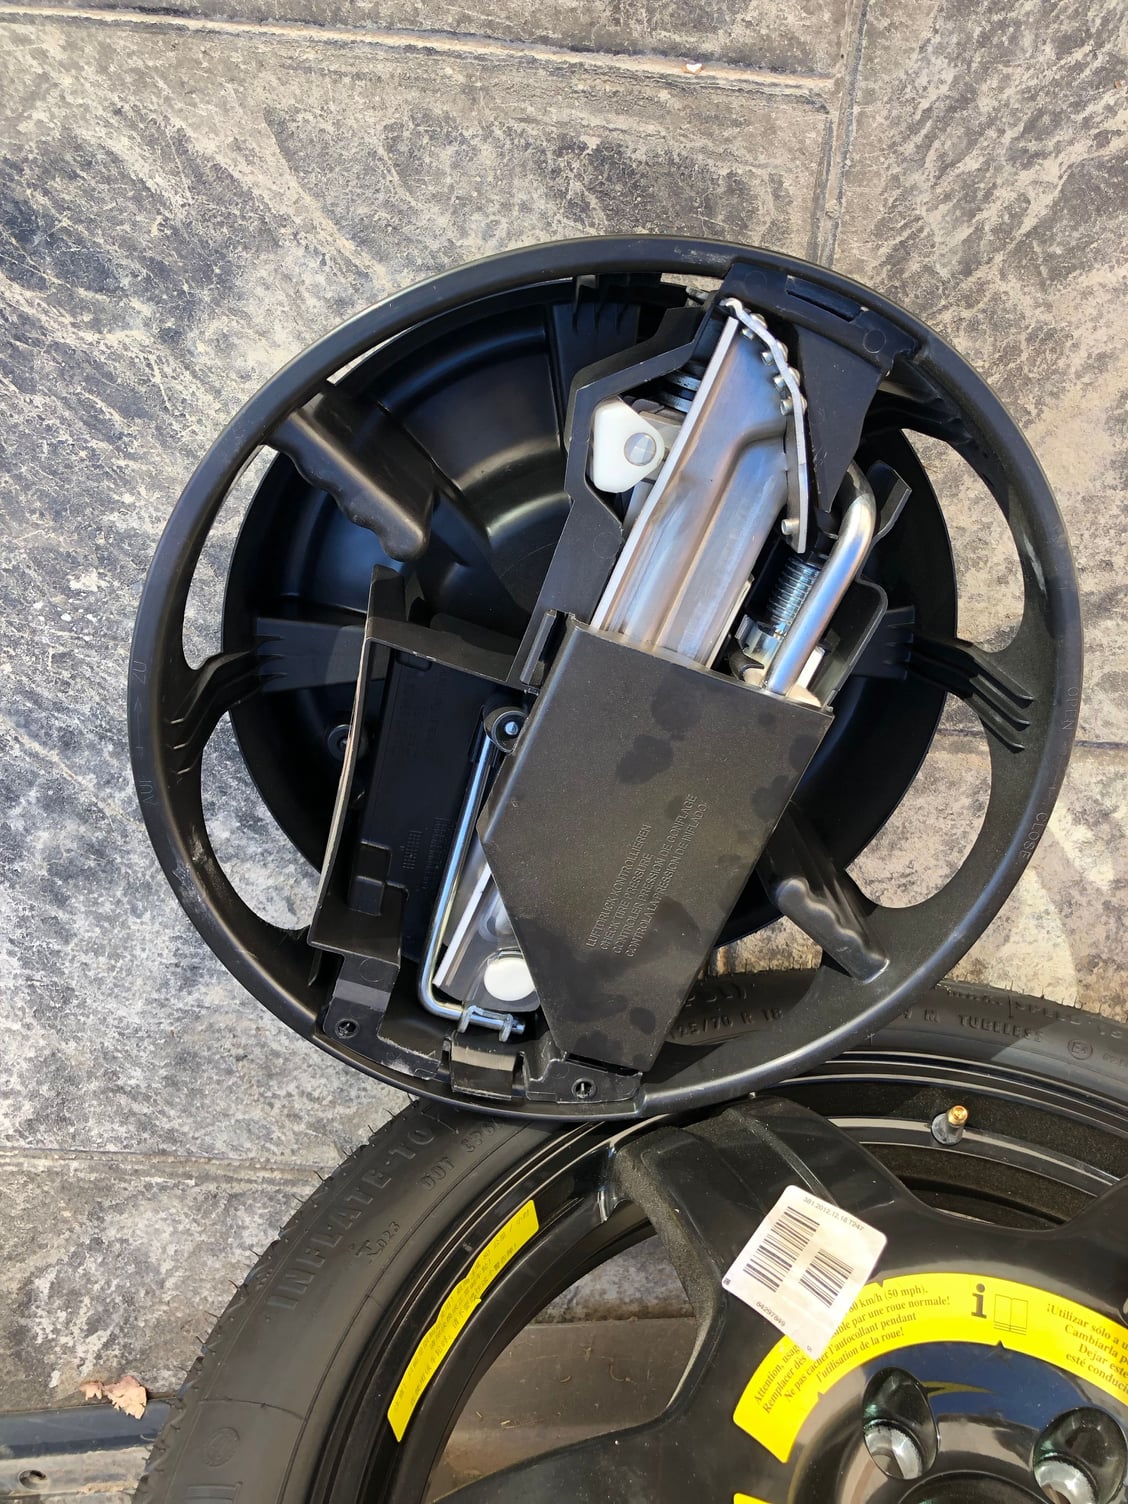 Wheels and Tires/Axles - OEM AMG C63 Spare Tire and Jack Equipment - New - 2010 to 2016 Mercedes-Benz C63 AMG - Riverside, CA 92507, United States